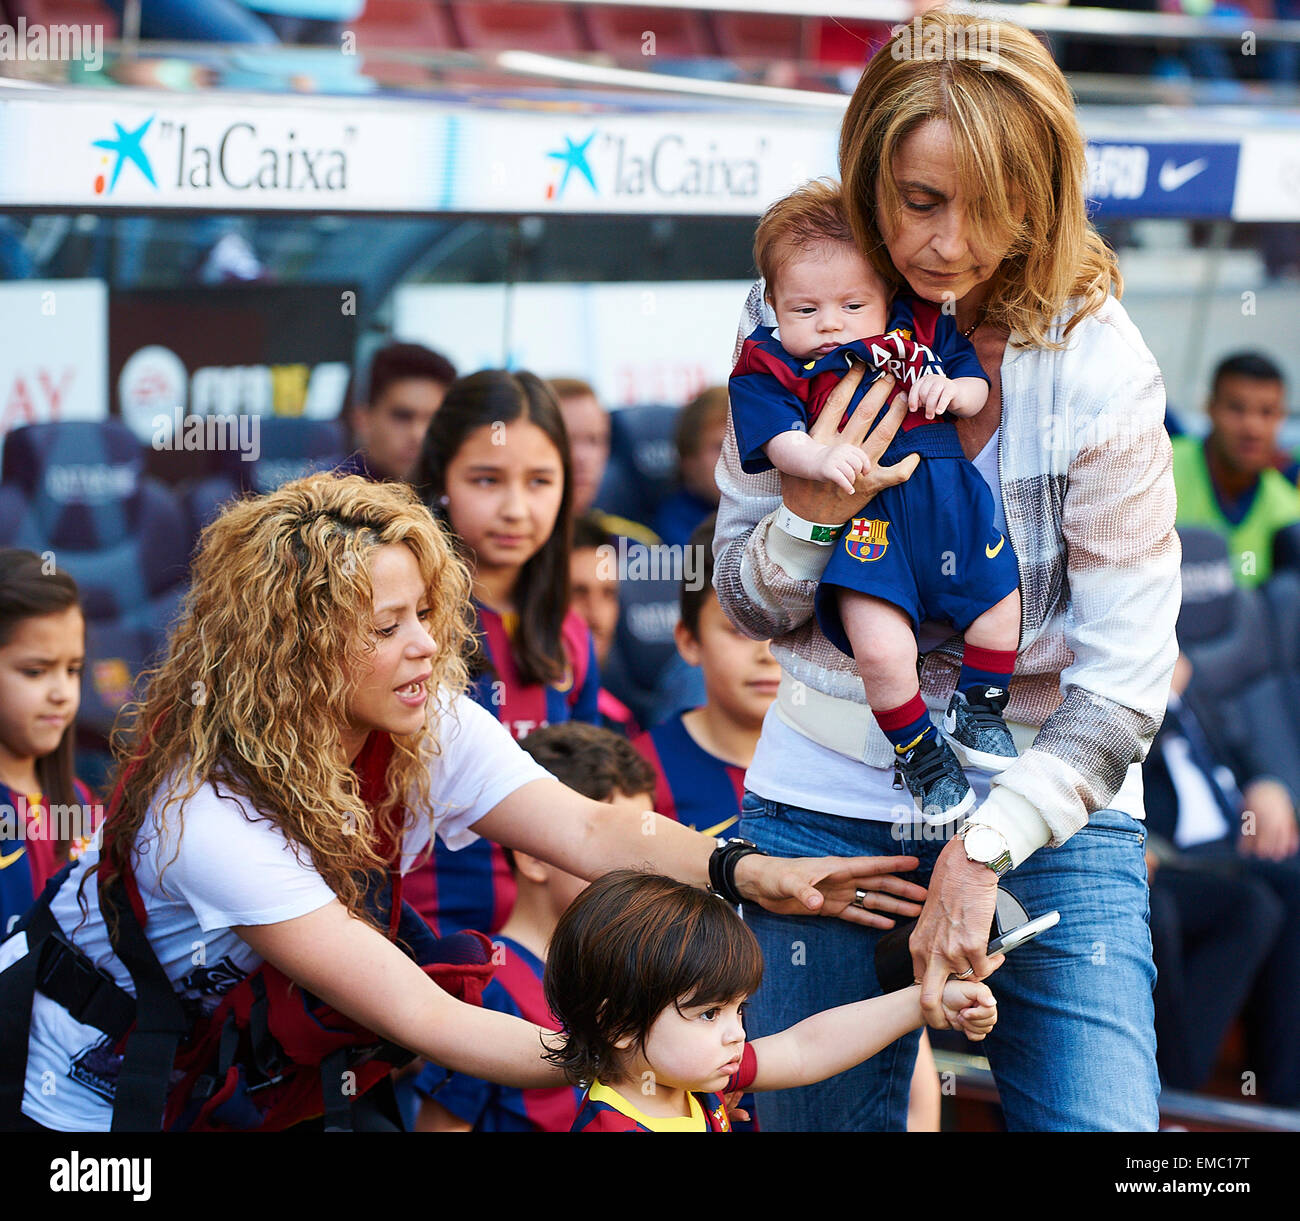 Shakira with her son Milan and Montse Bernabeu (mother of Gerard Pique) holds Sasha, prior La Liga soccer match between FC Barcelona and Valencia CF, at the Camp Nou stadium in Barcelona, Spain, saturday april 18, 2015. Foto: S.Lau Stock Photo